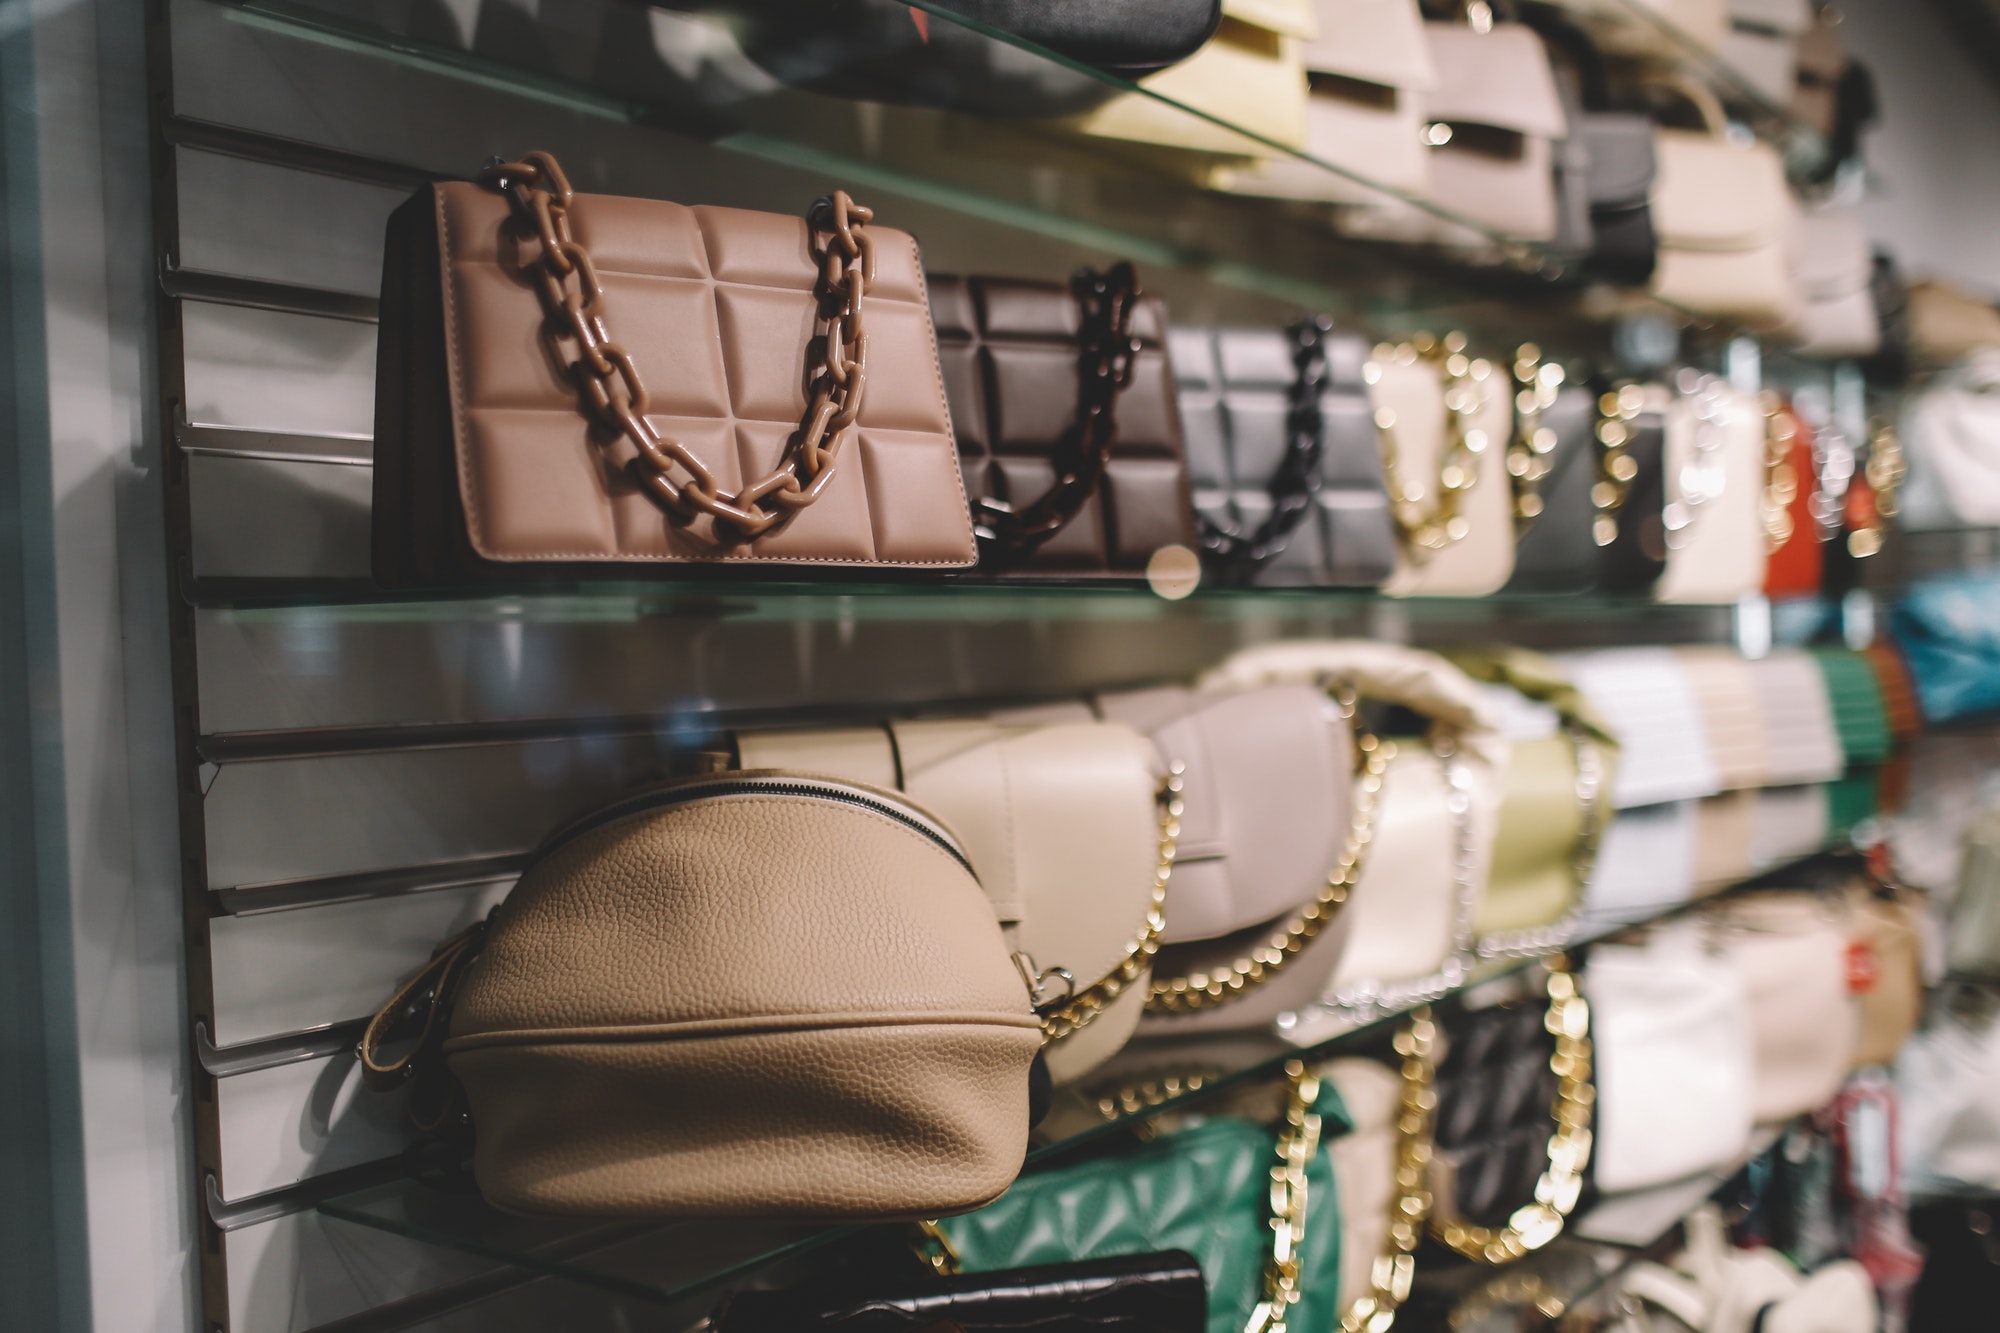 A display of handbags in a retail store.